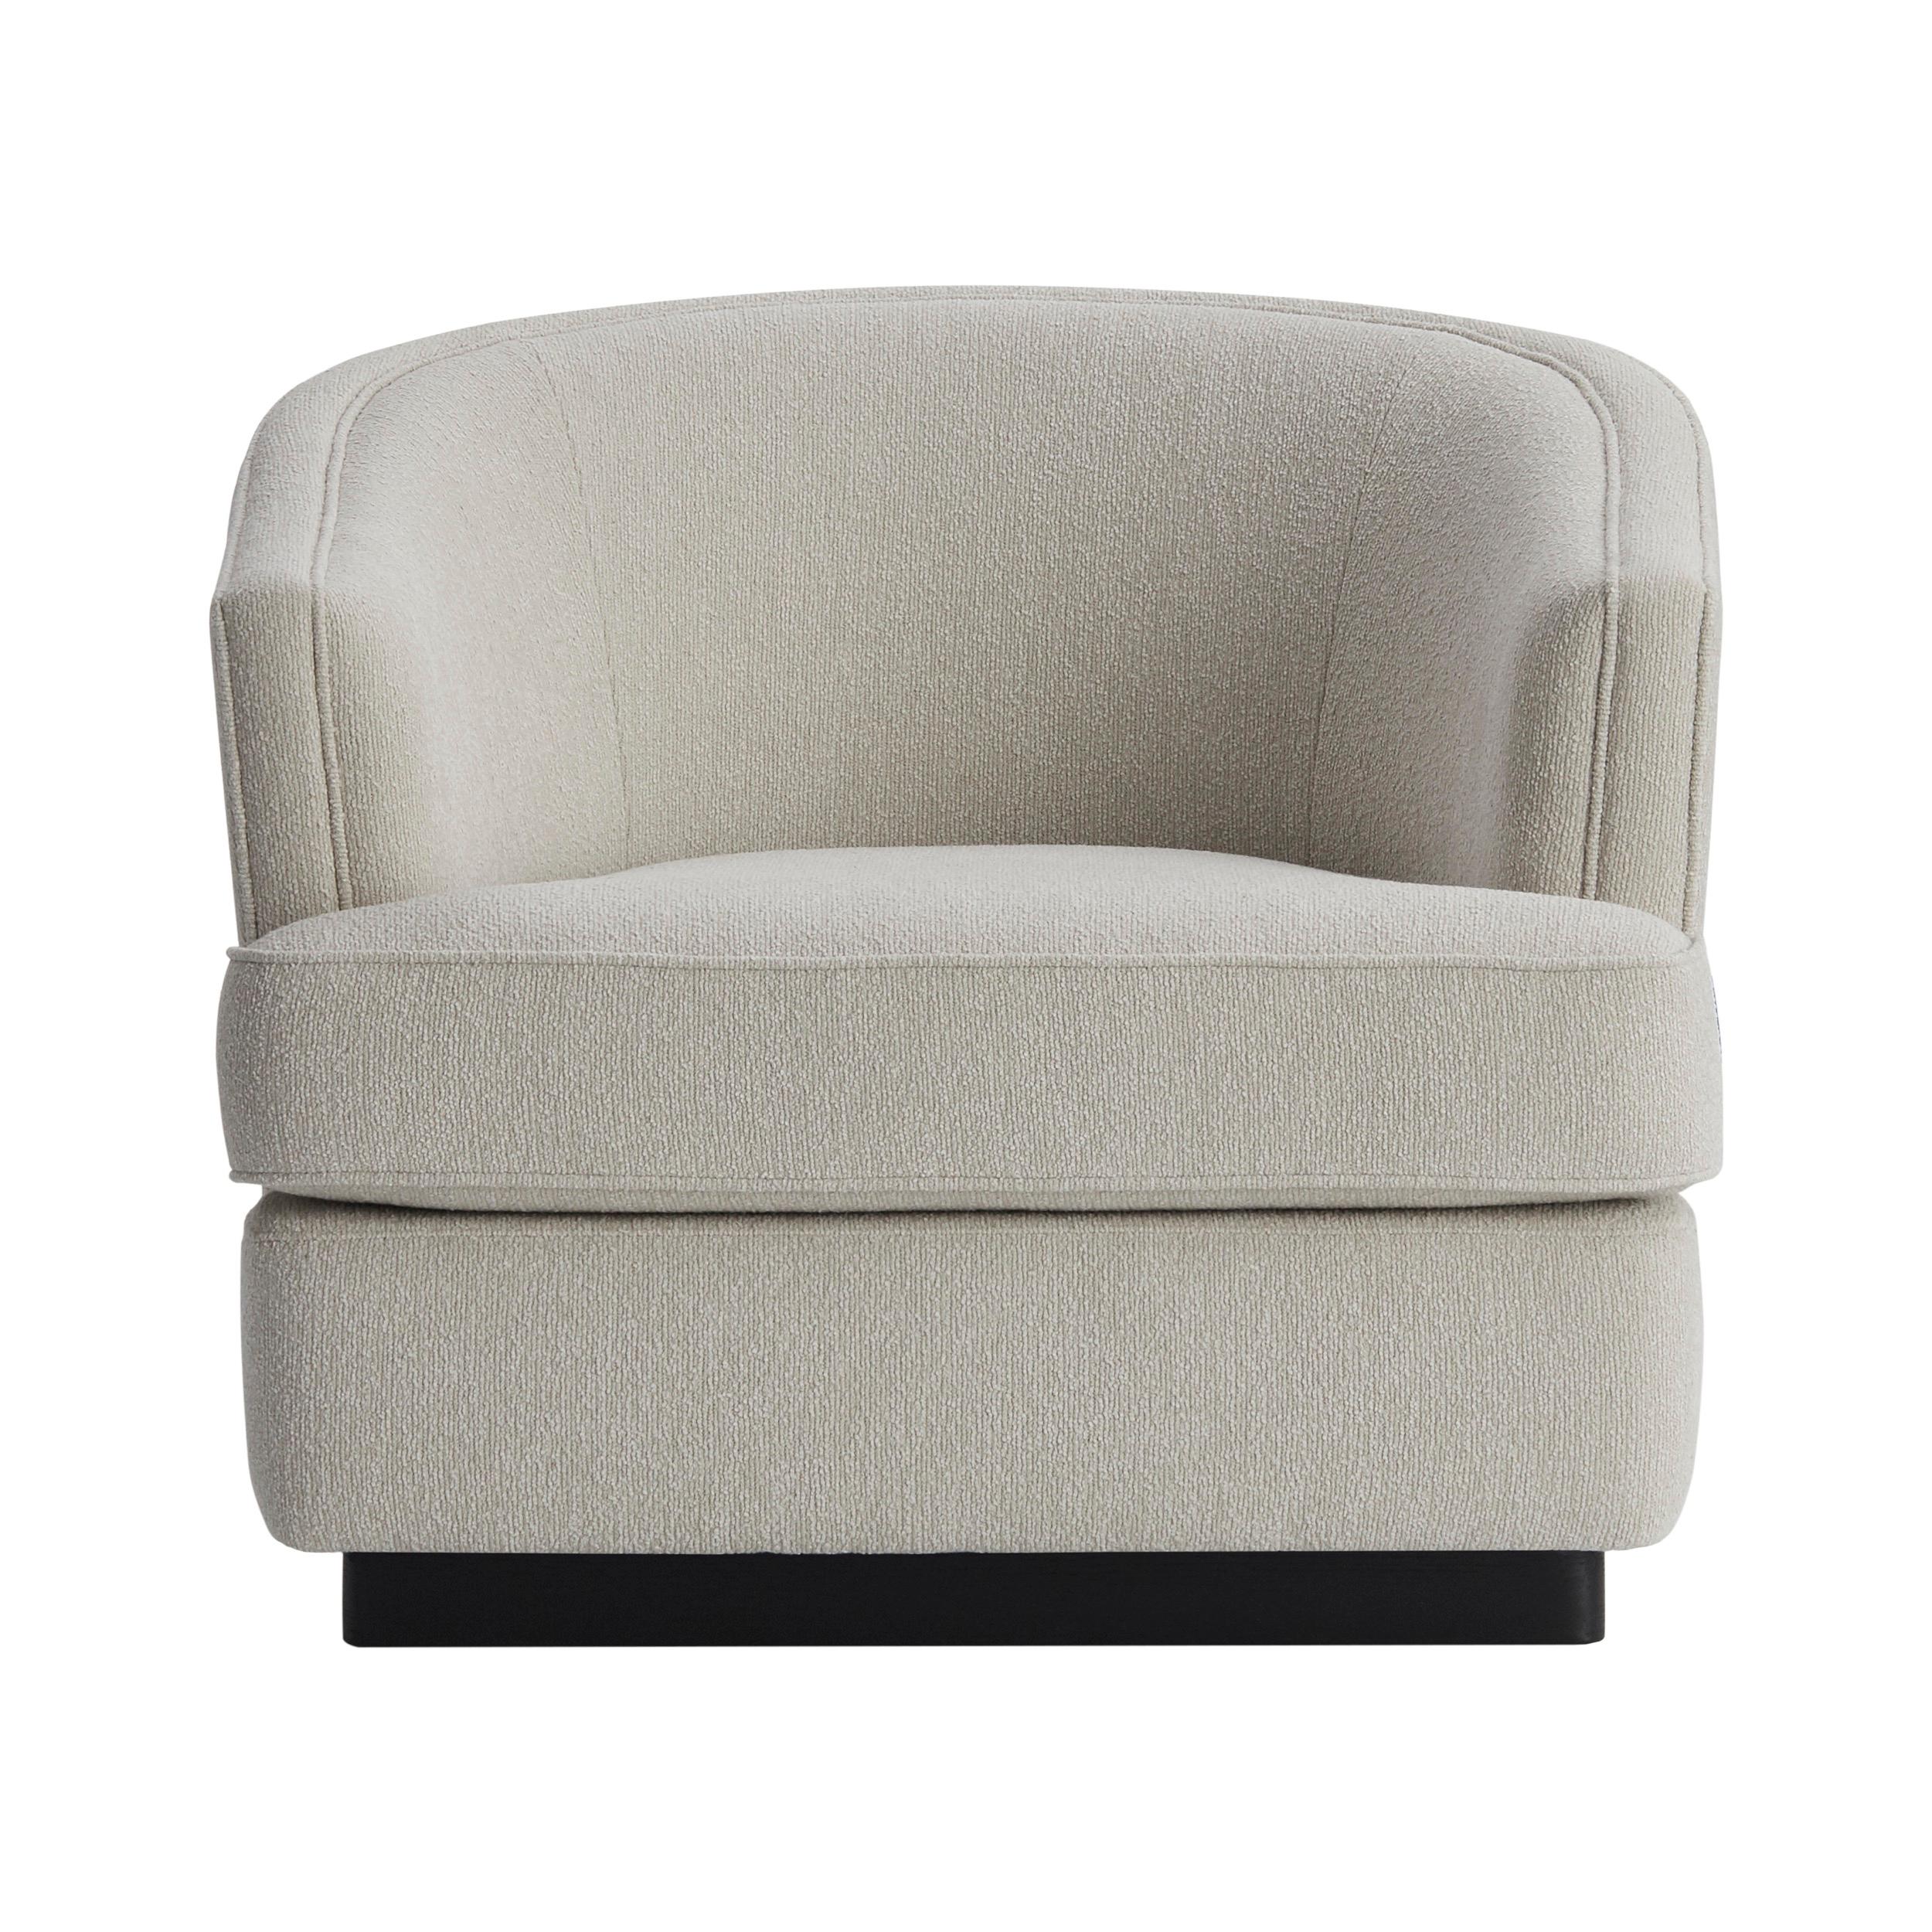 ROMANA armchair, with lacquered wooden plinth, is a very classic and comfortable piece with an incomparable quality, made to be used on a daily basis.‎ Romana is available in a wide range of fabrics, eco-leather, natural leather or COM, and is